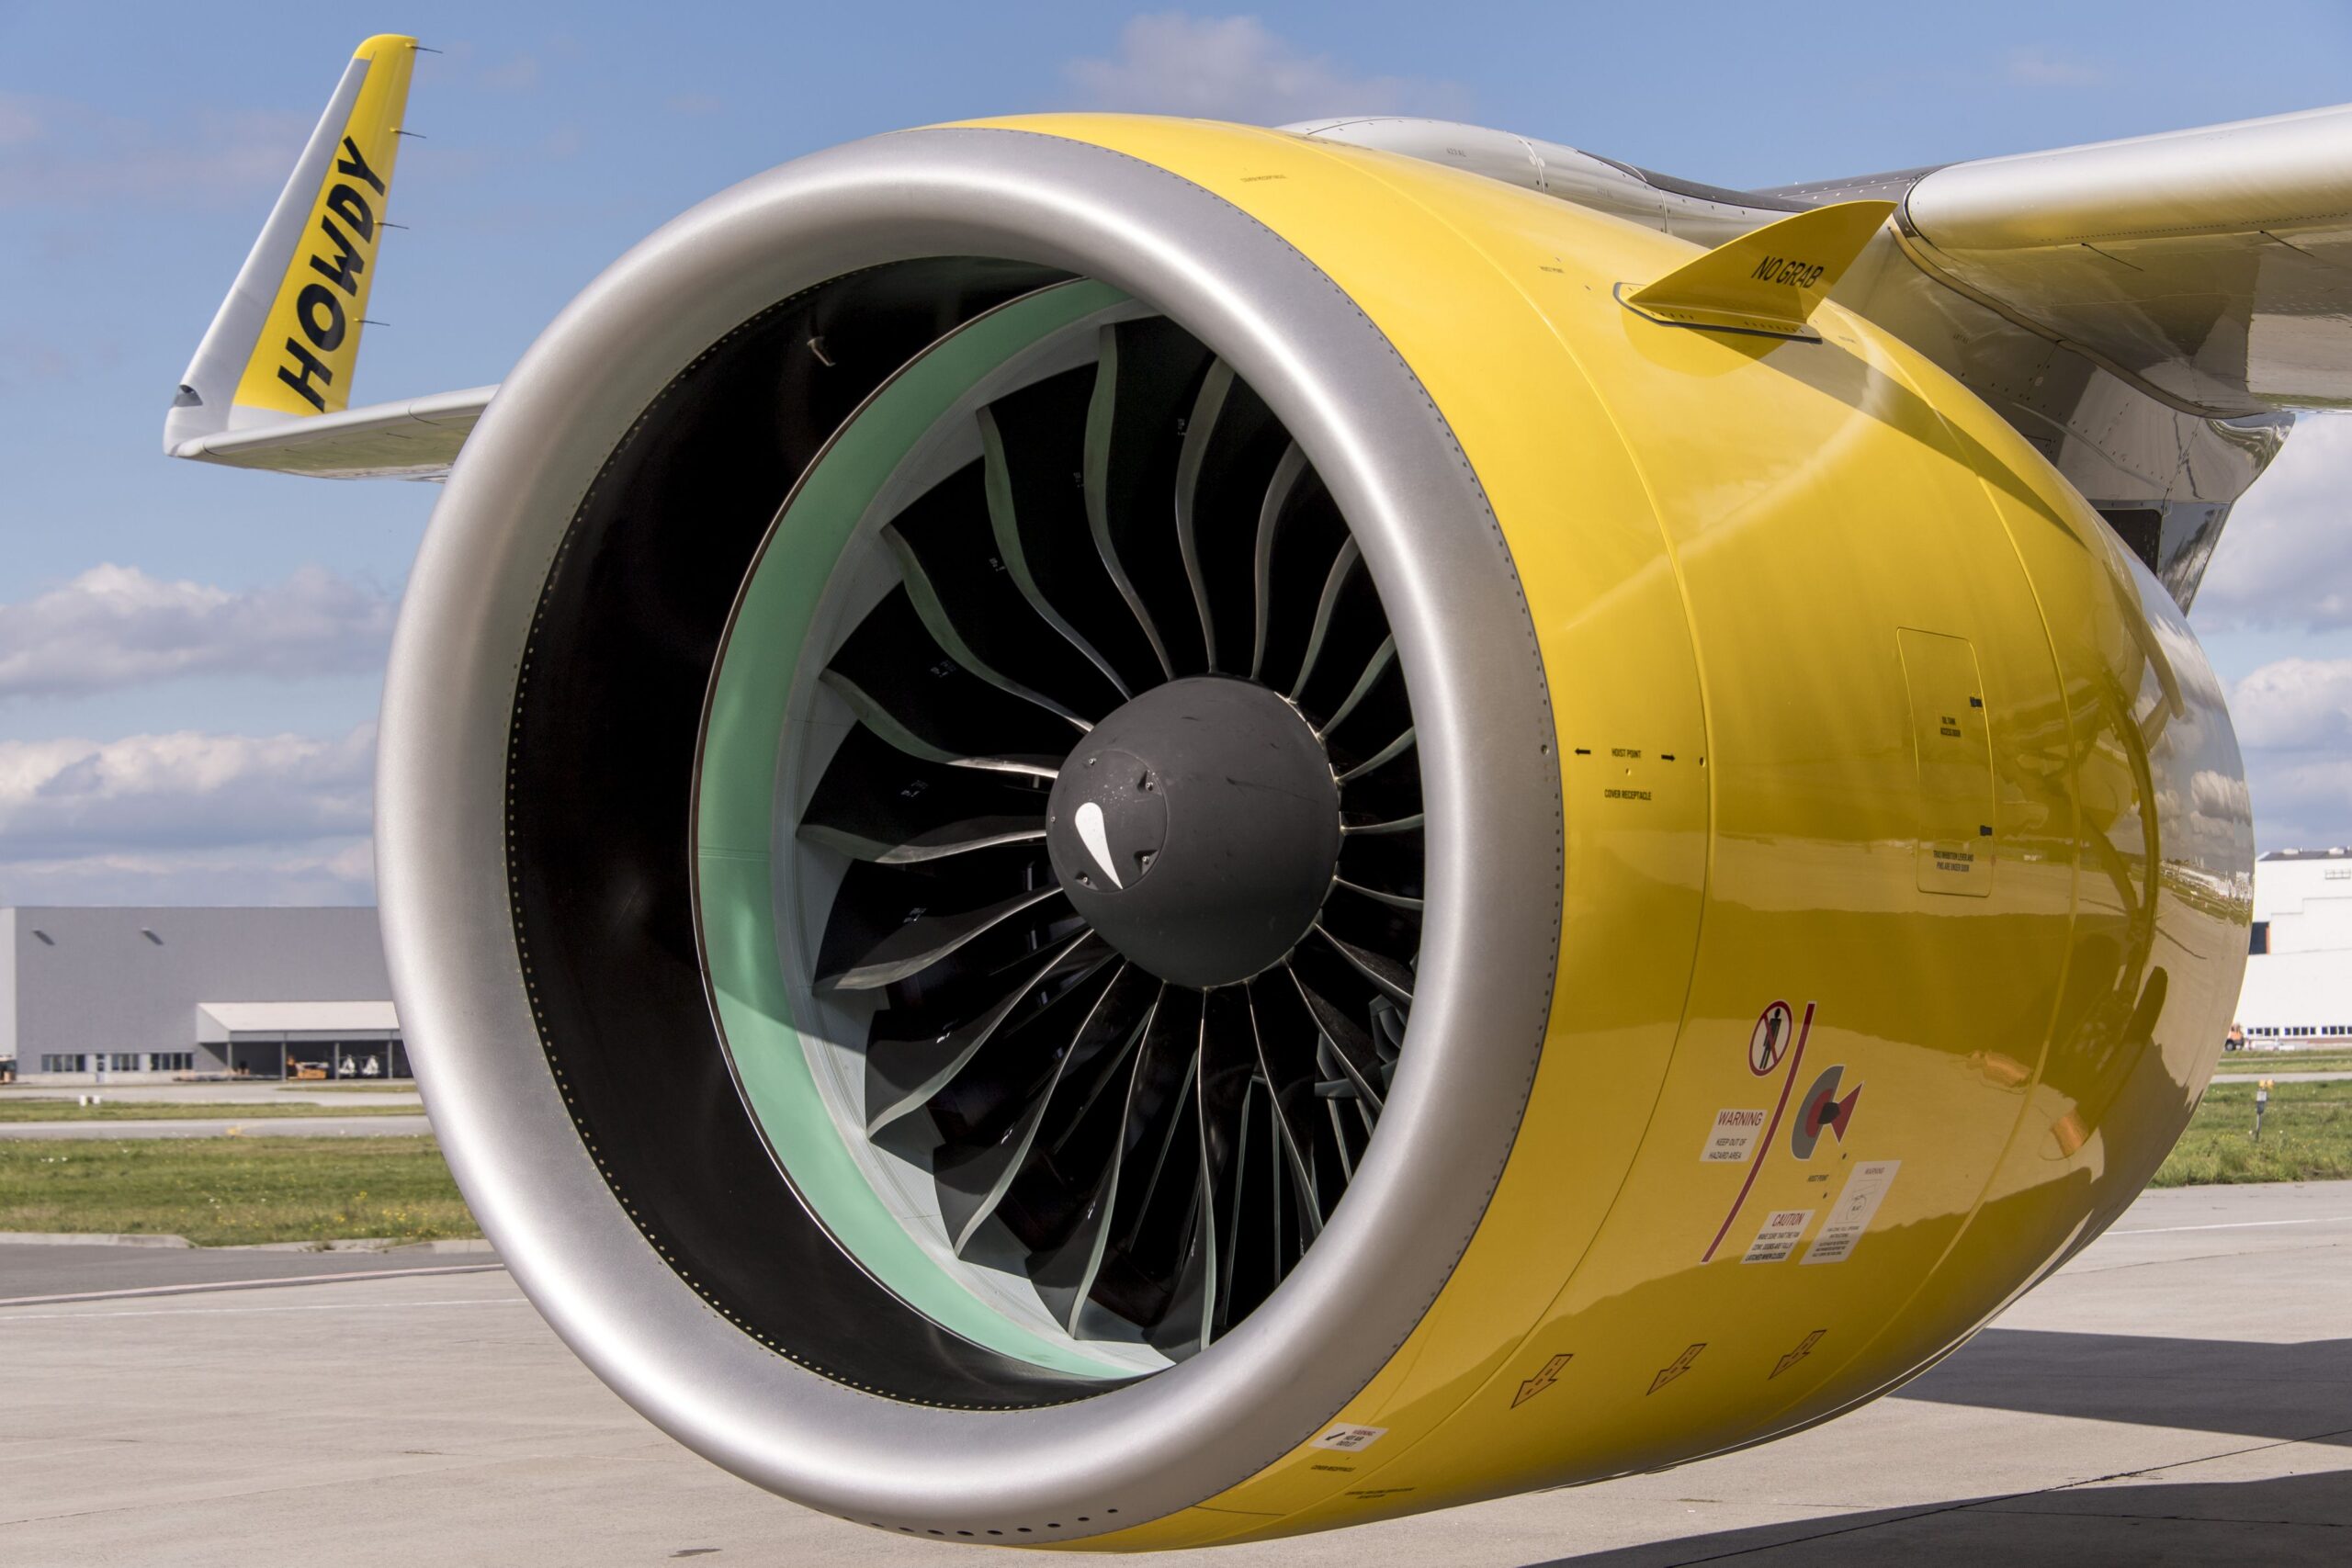 FAA Issued New AD for A320neo PW Engine